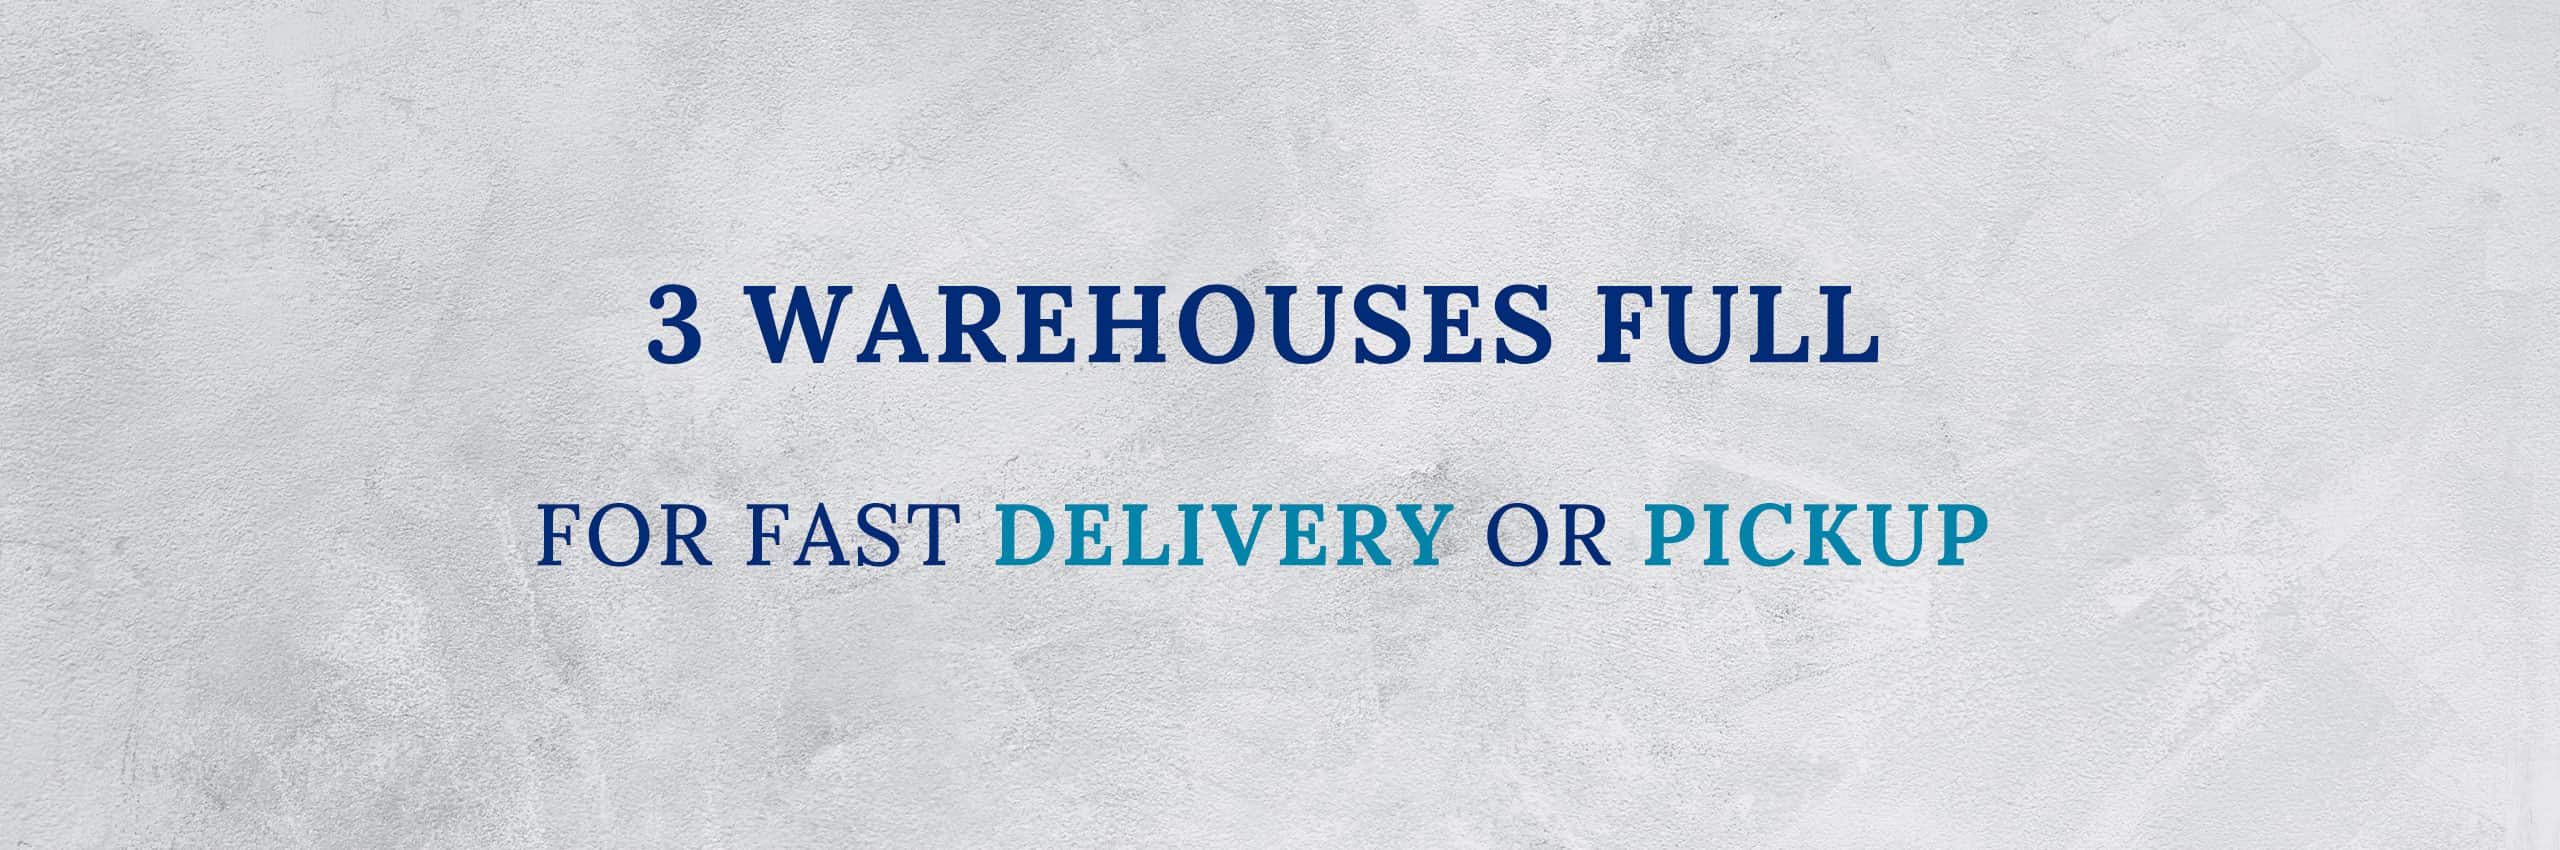 3 warehouses full for fast delivery or pickup